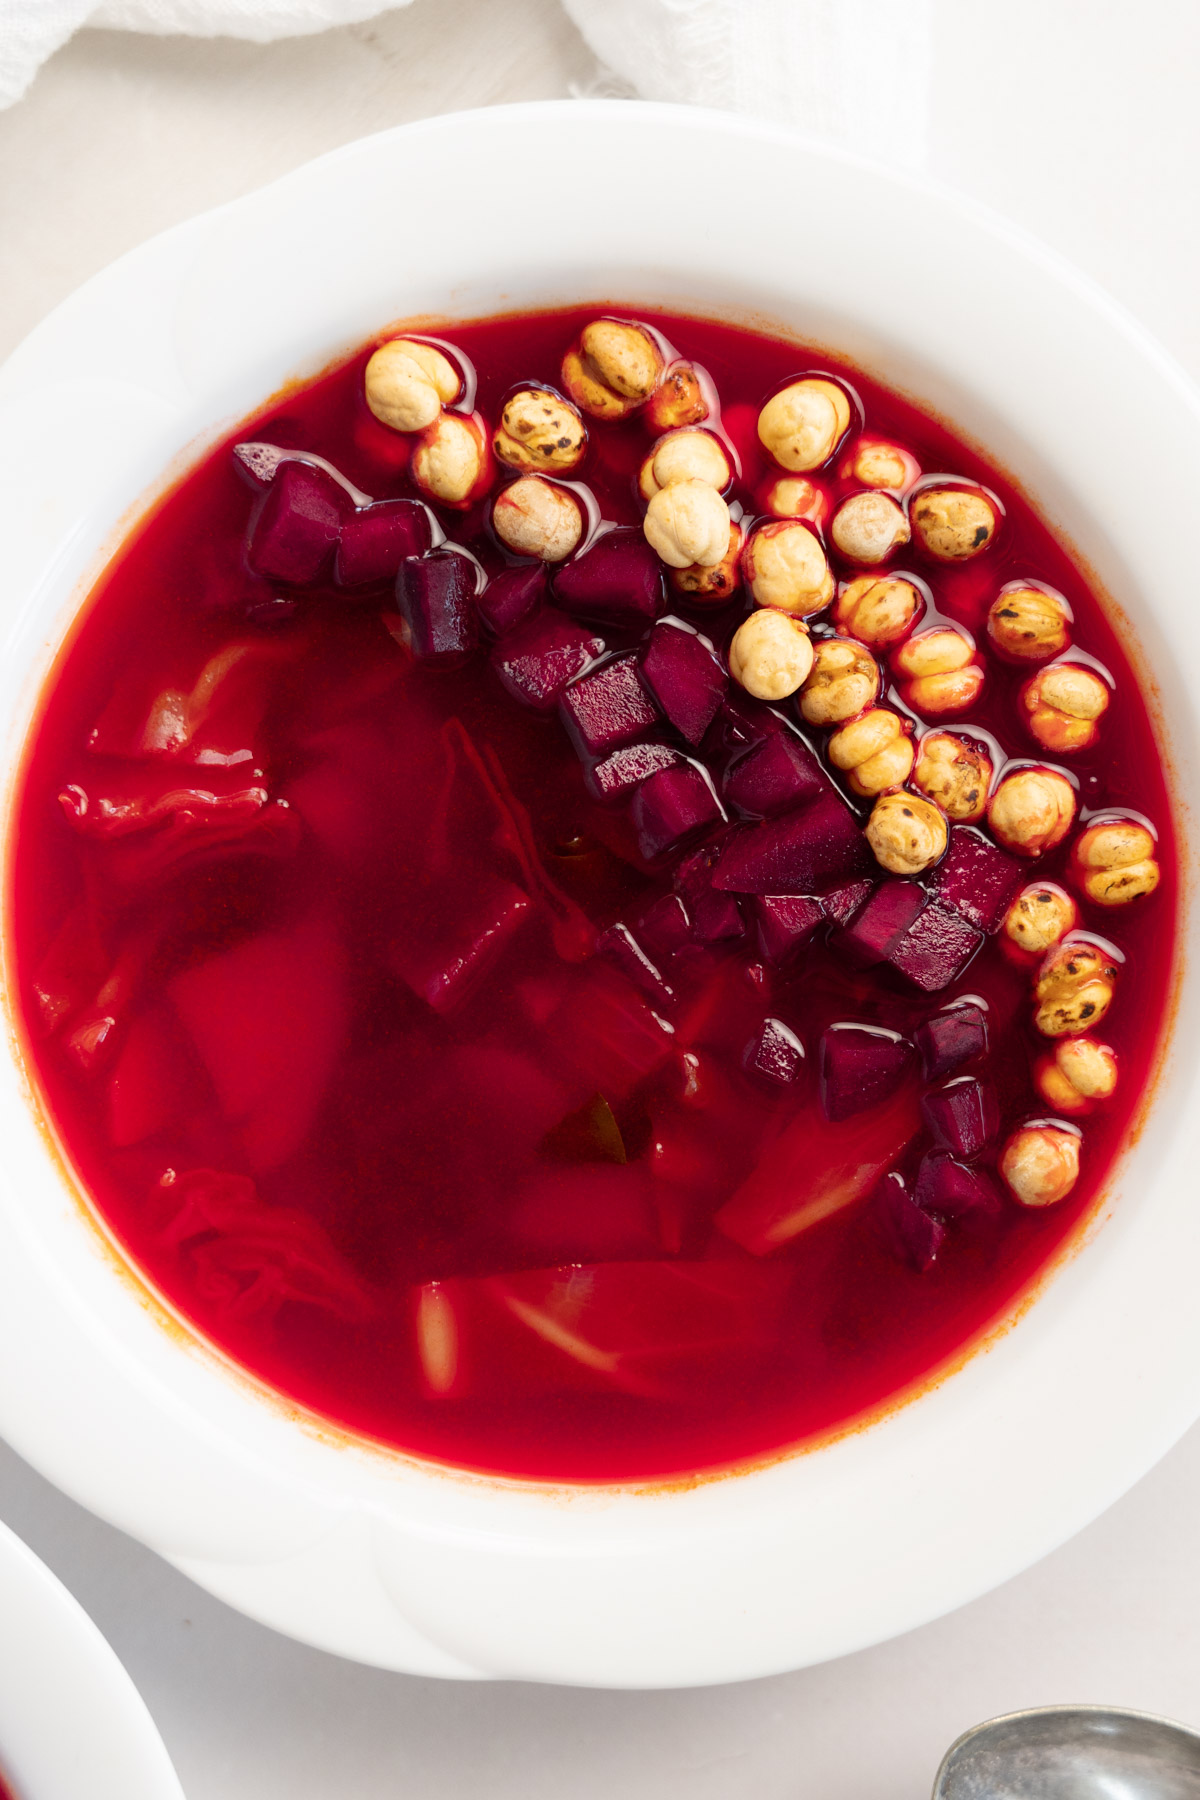 beet soup up close with chickpeas as garnish